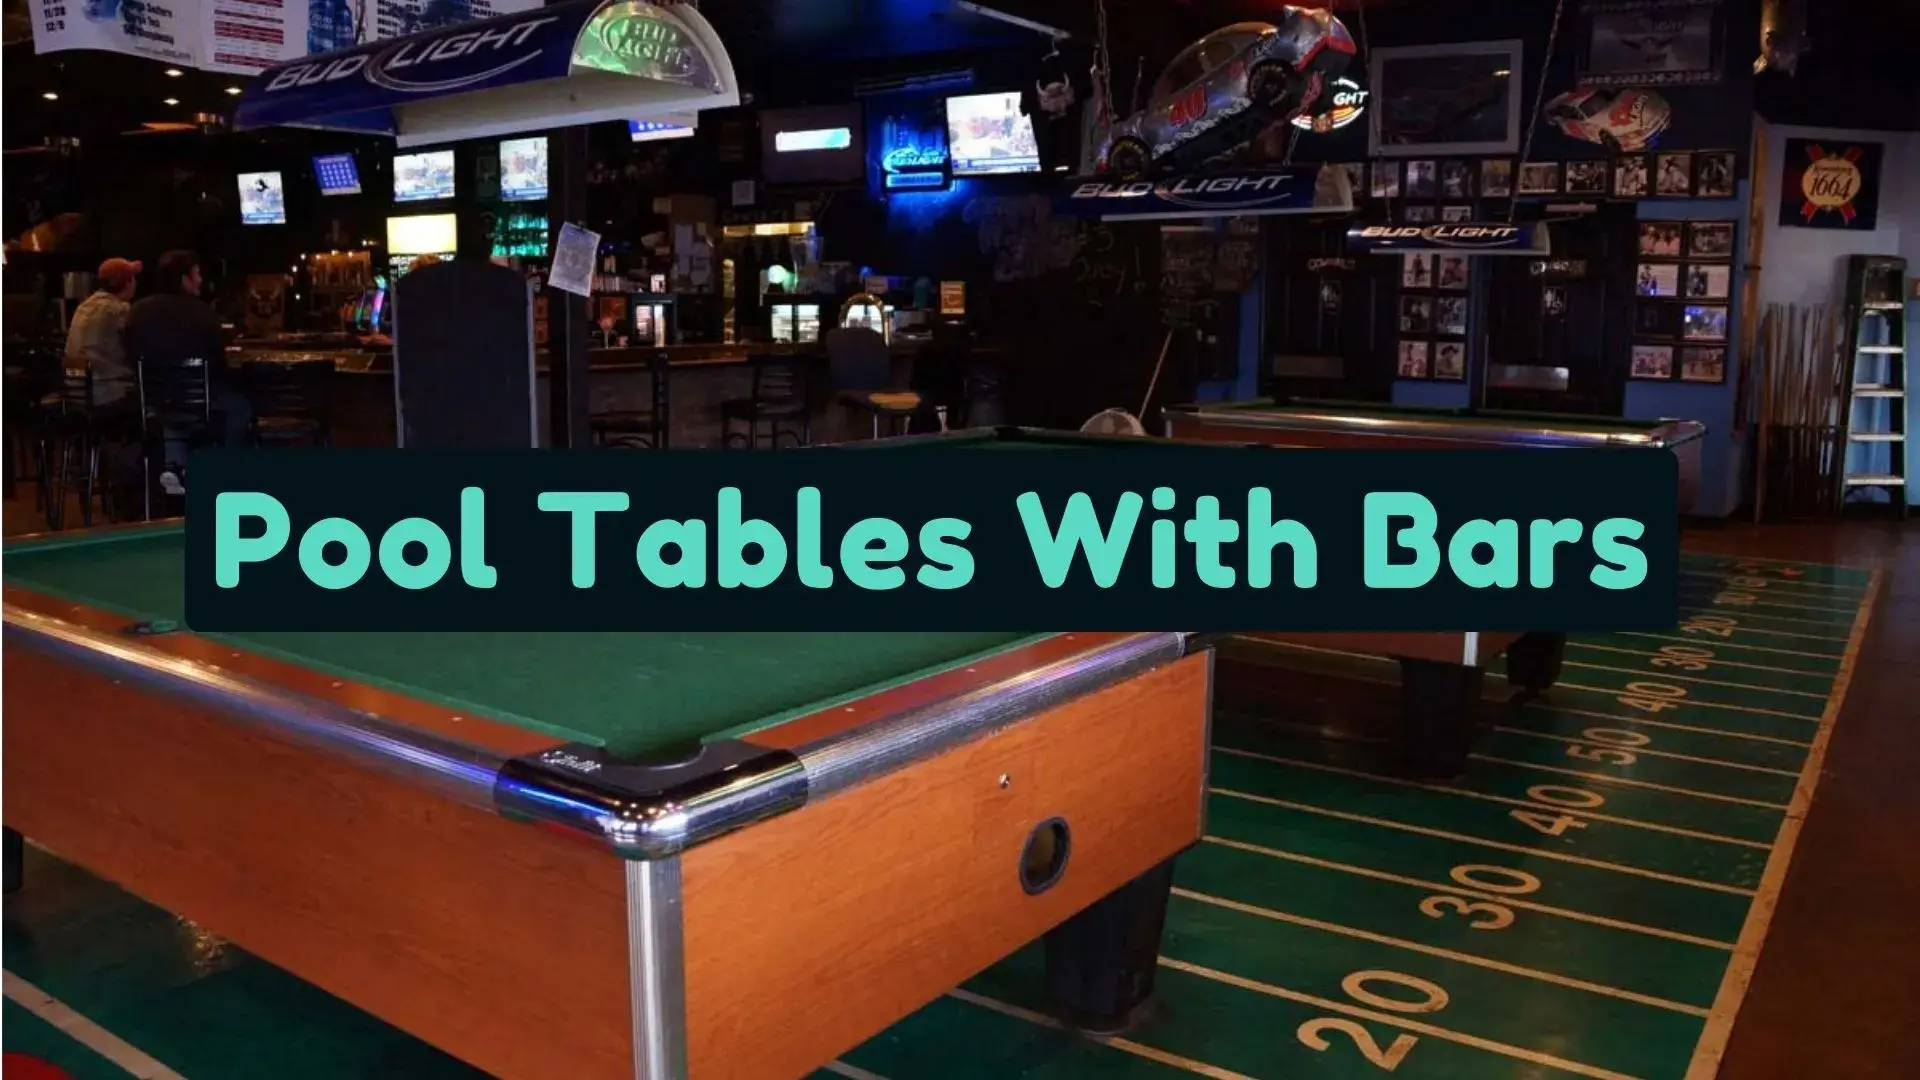 Bars With Pool Tables Near Me – Billiards & Pools Open Near Me